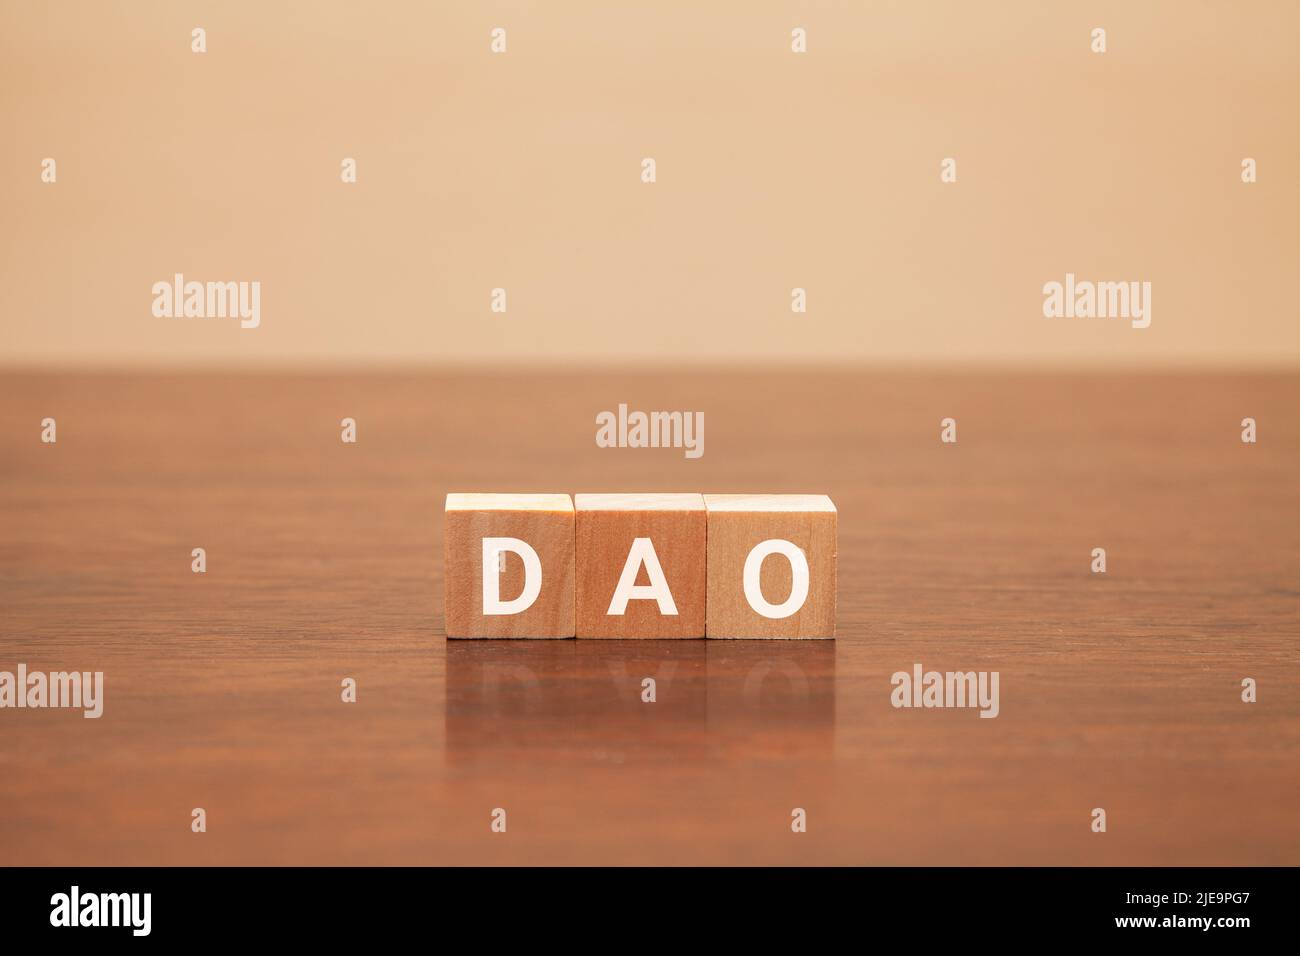 DAO characters. Decentralized autonomous organization. Written on three wooden blocks. White letters. Wooden table background. Stock Photo